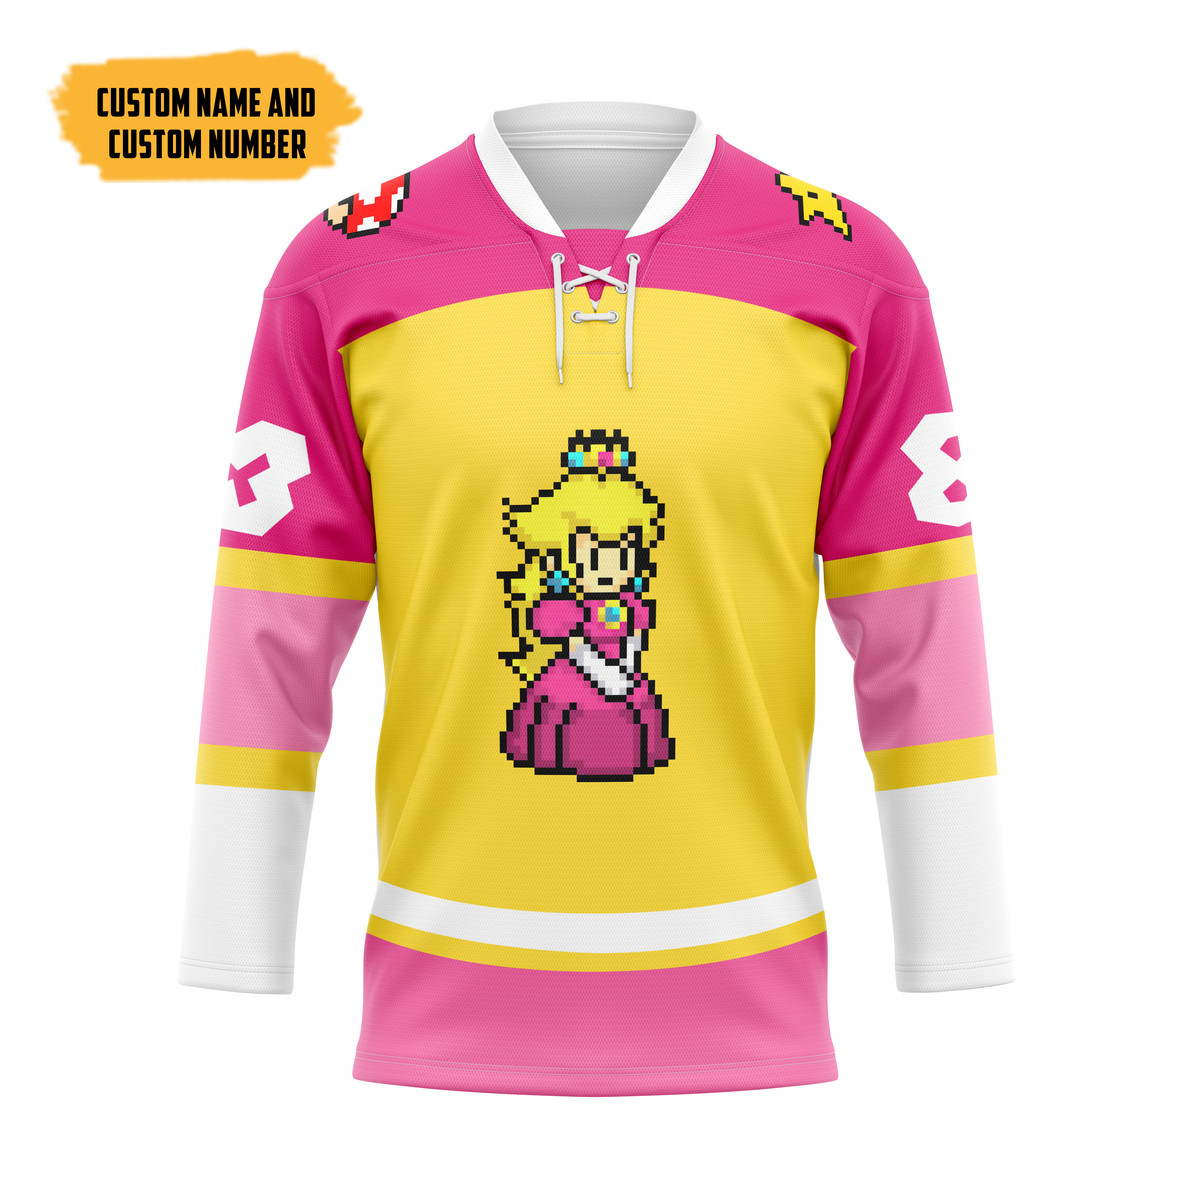 The Best Hockey Jersey Shirt in 2022 271